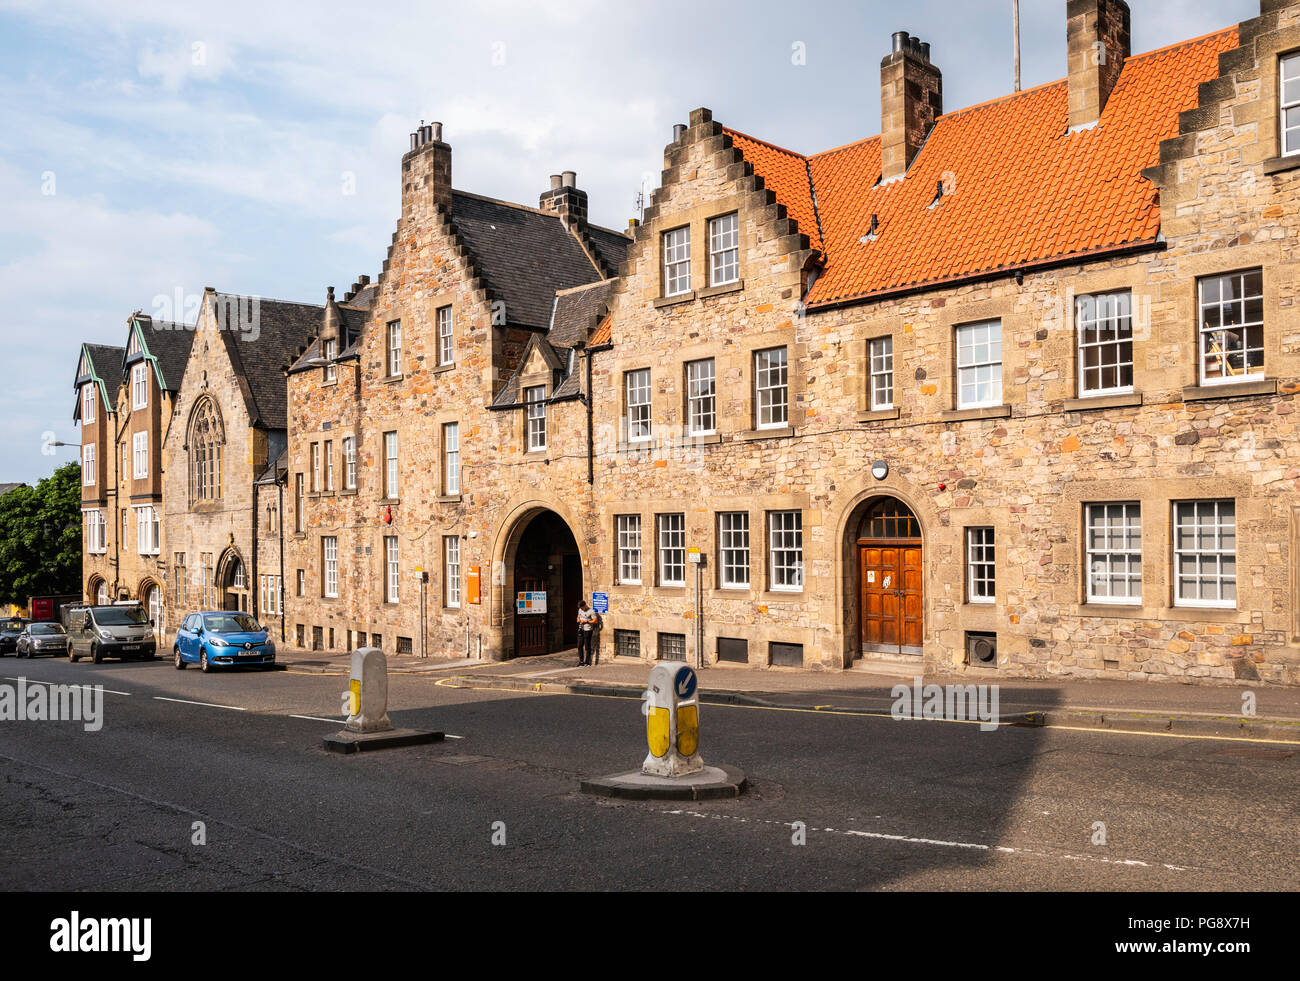 University of Edinburgh Student Union Buildings in The Pleasance, a street just outside the Old Town of Edinburgh, Scotland. Stock Photo